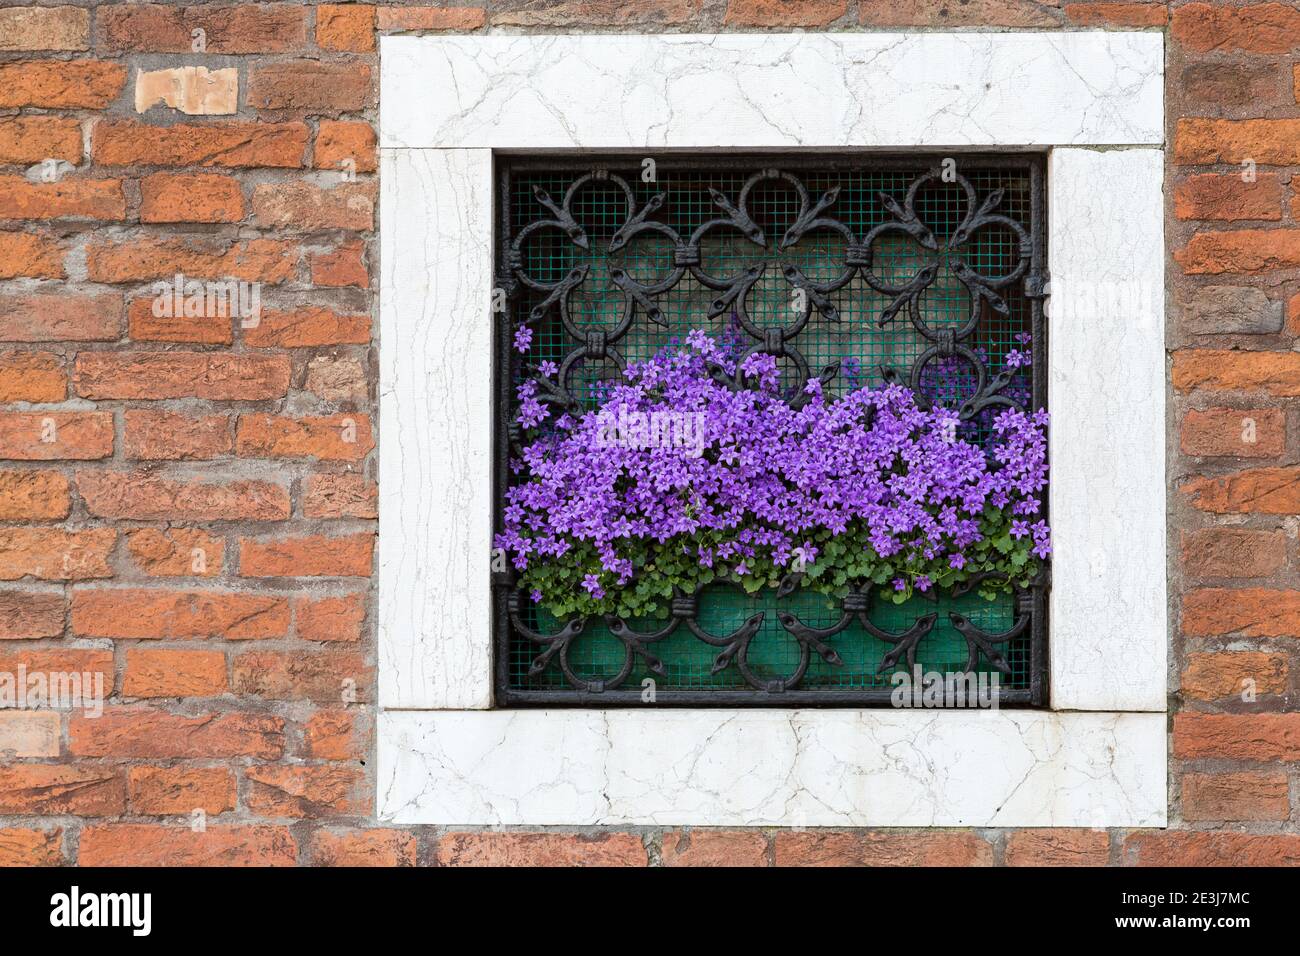 Violet flowers of Dalmation bellflower Campanula portenschlagiana looking through window grill, Venice, Italy Stock Photo